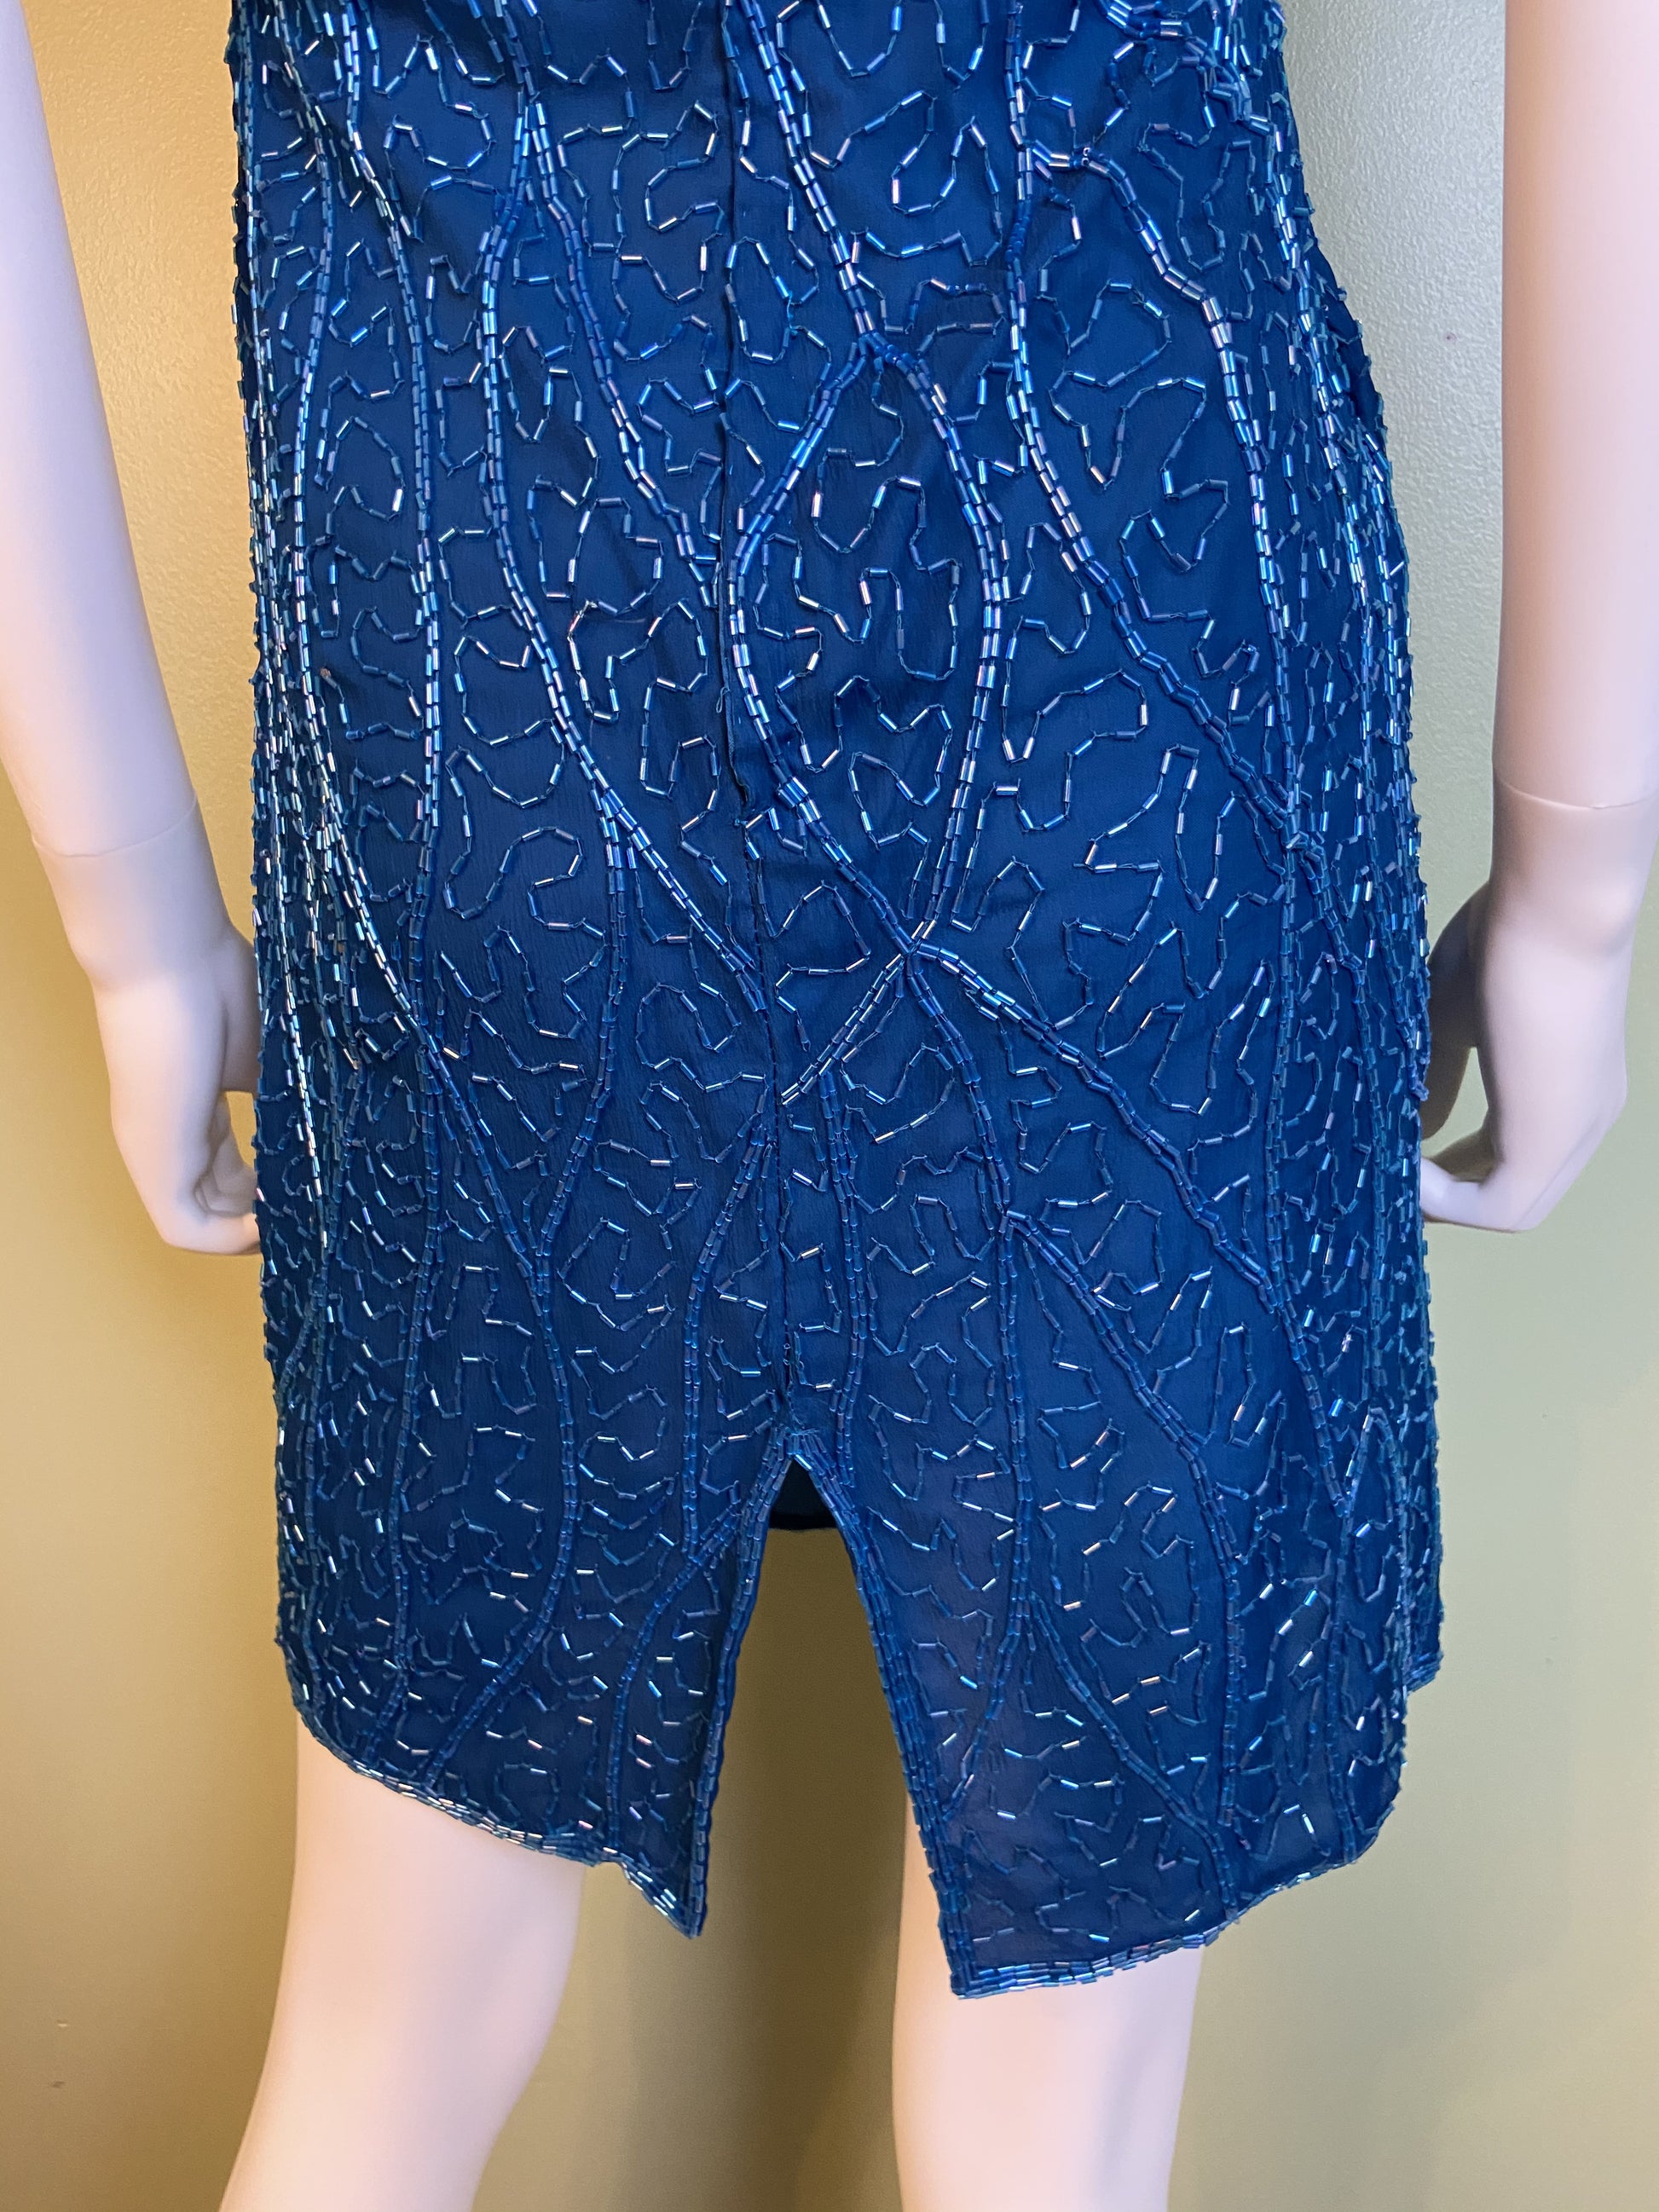 Vintage Turquoise Silver Beaded Icicle Silk Mini Dress Abby Essie